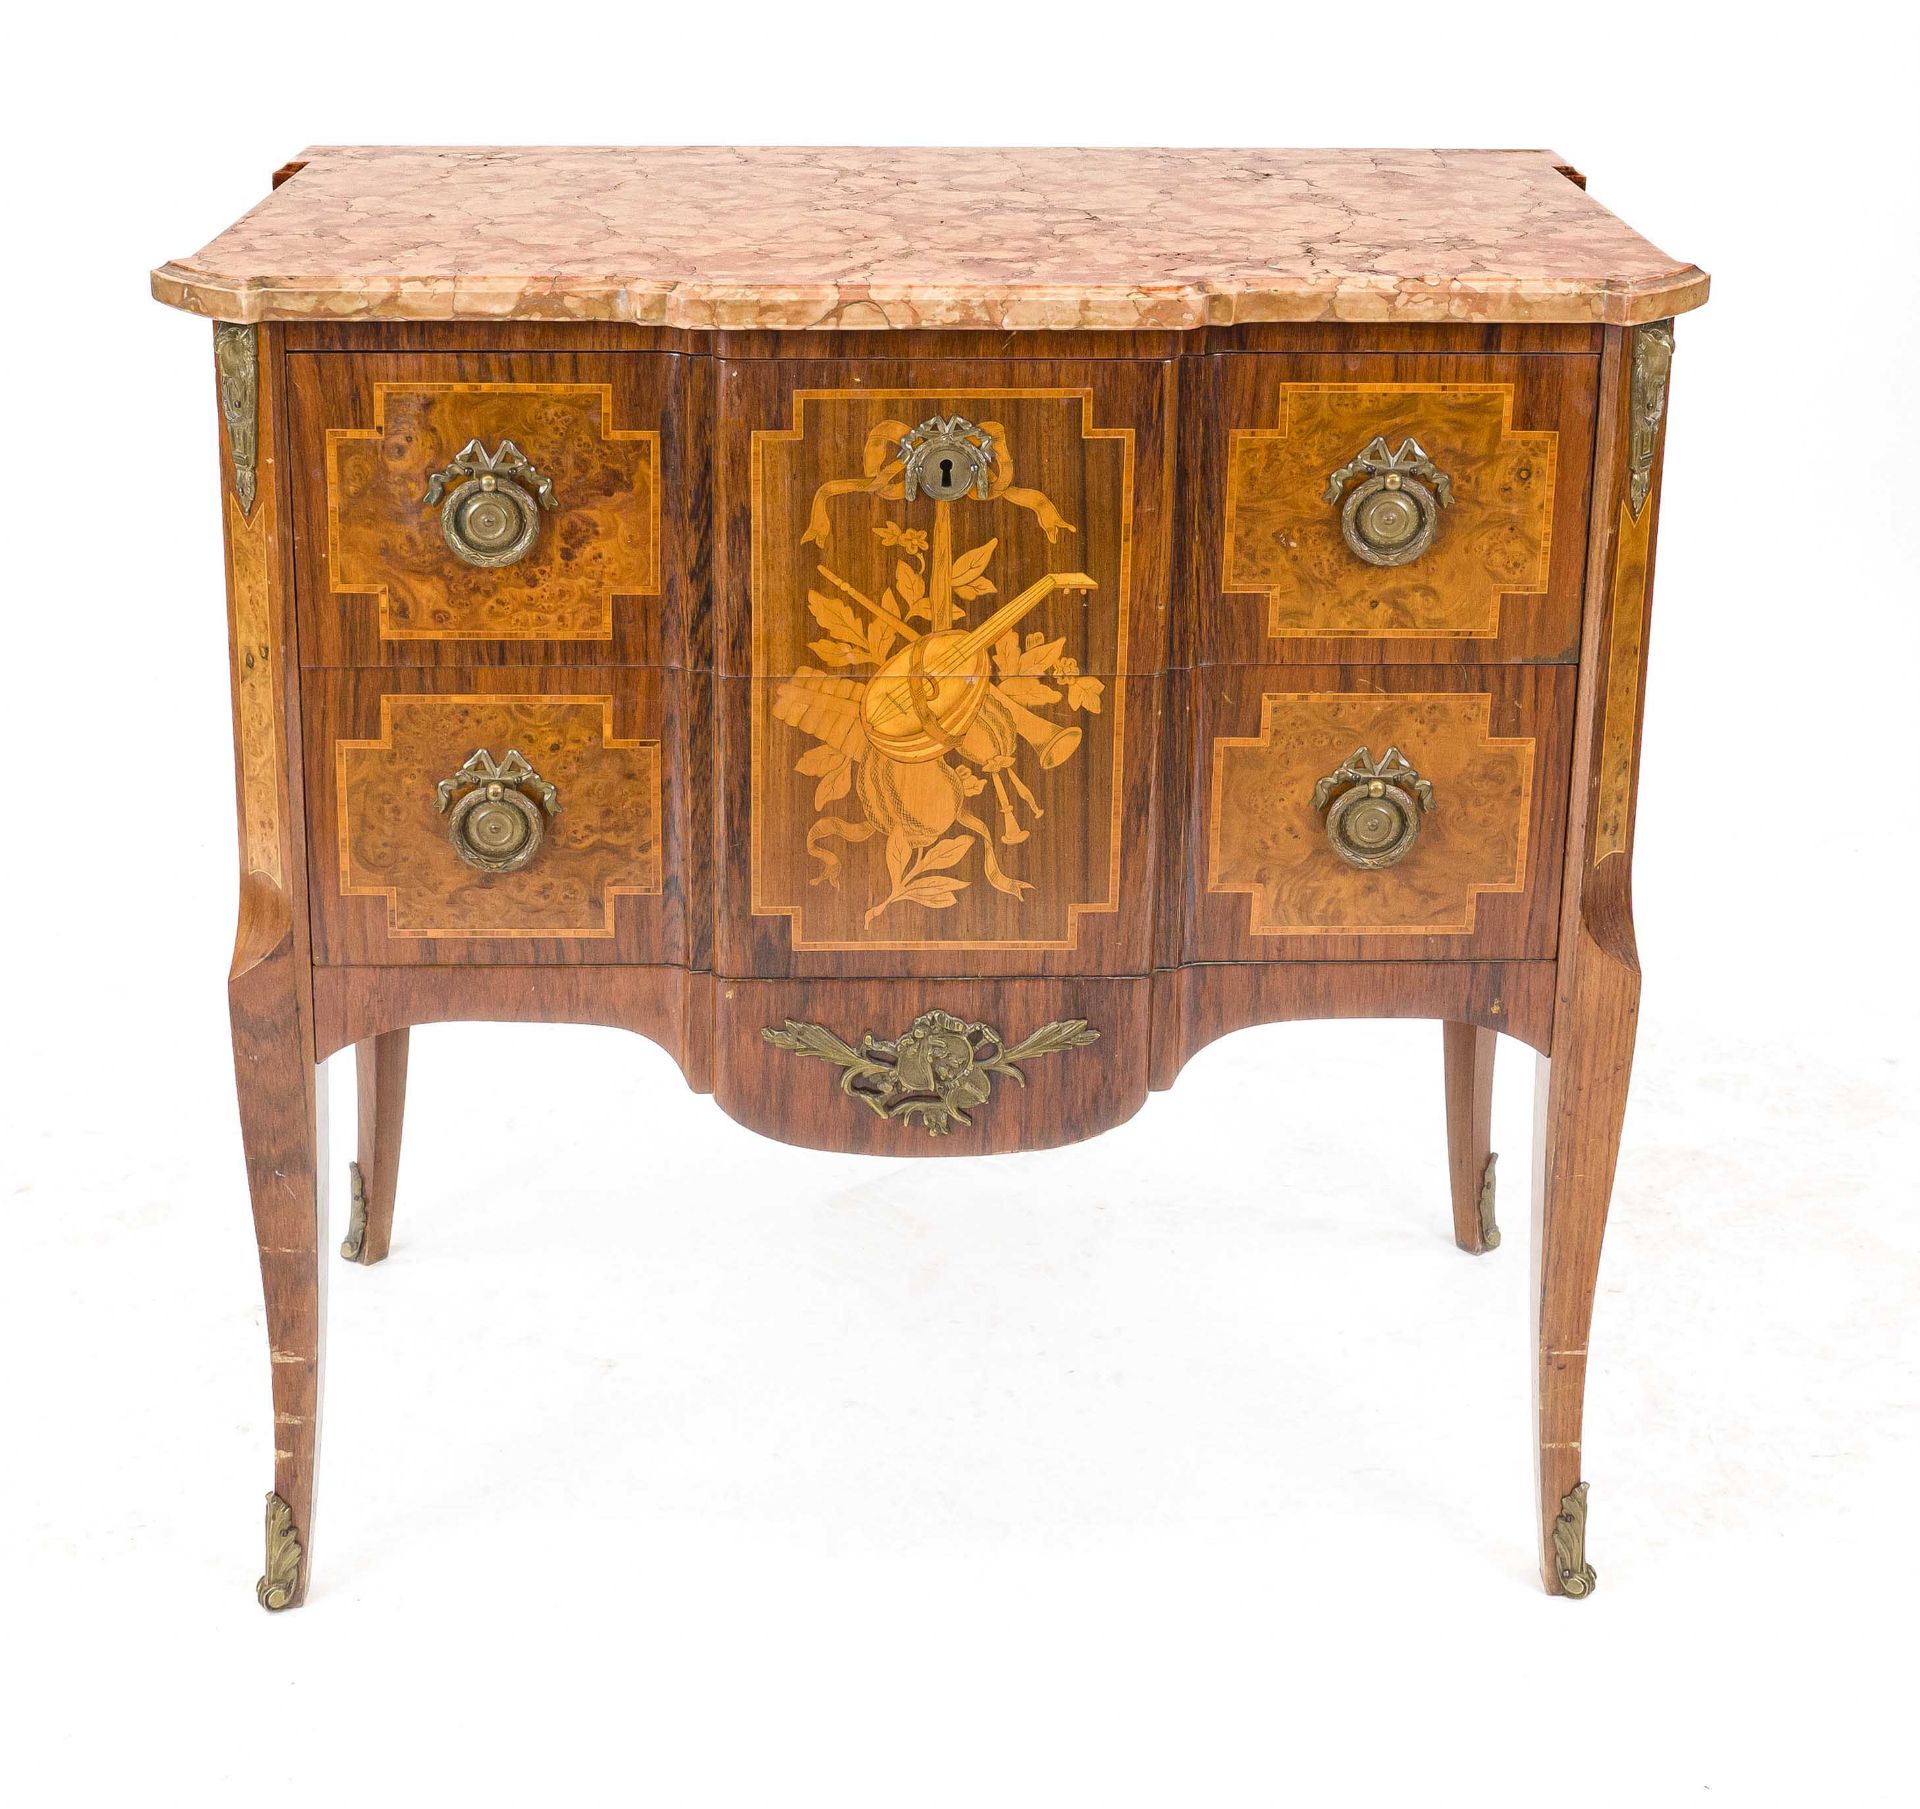 Classicist-style chest of drawers, 20th century, walnut and other precious woods, rose-colored stone - Image 2 of 3